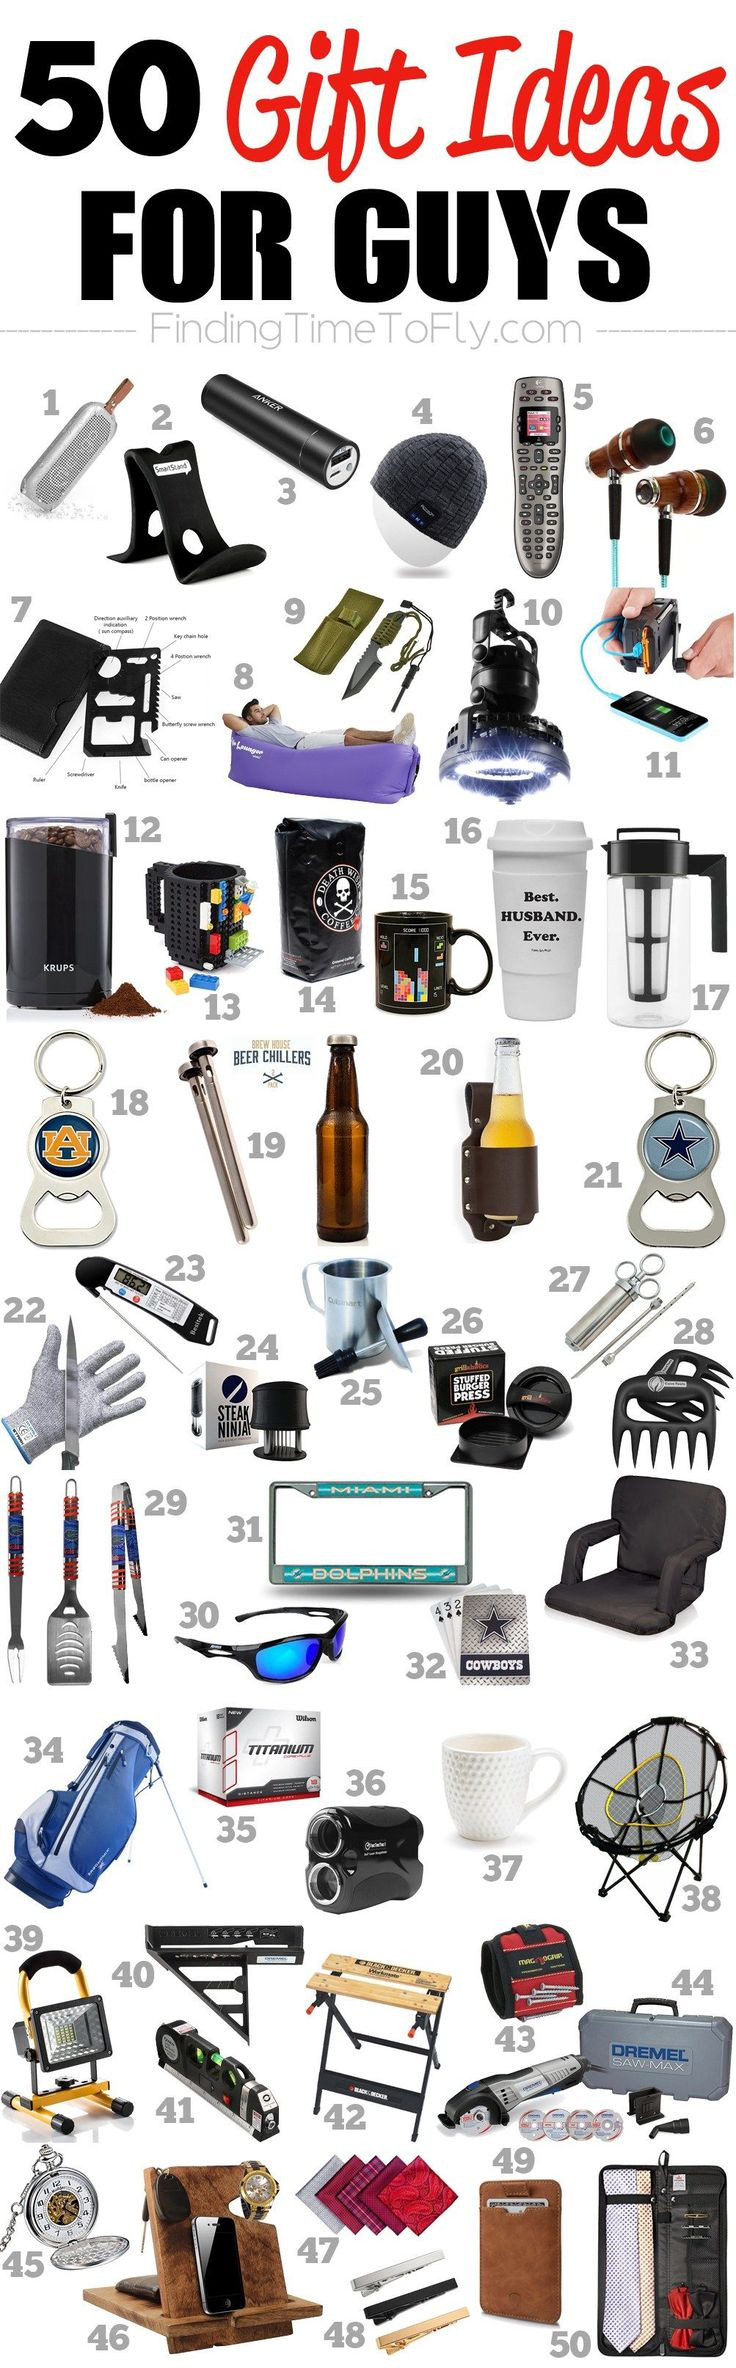 Male Birthday Gift Ideas
 418 best College Student Gift Ideas images on Pinterest